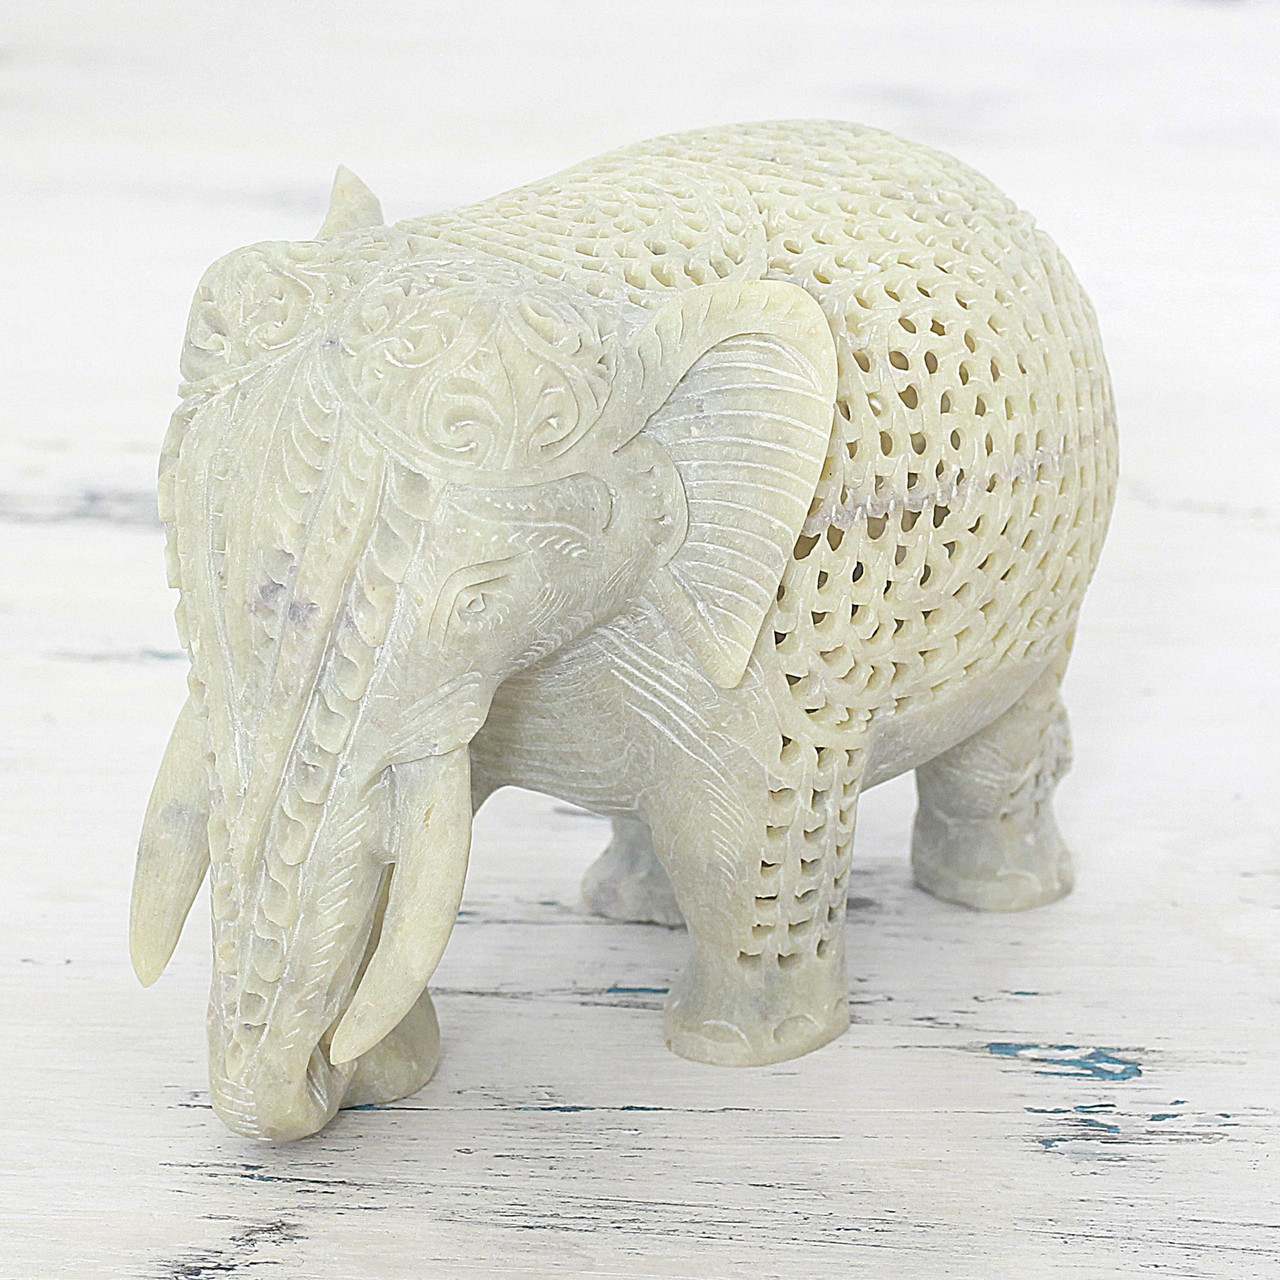 Soapstone Carving Kit - Elephant - The Compleat Sculptor